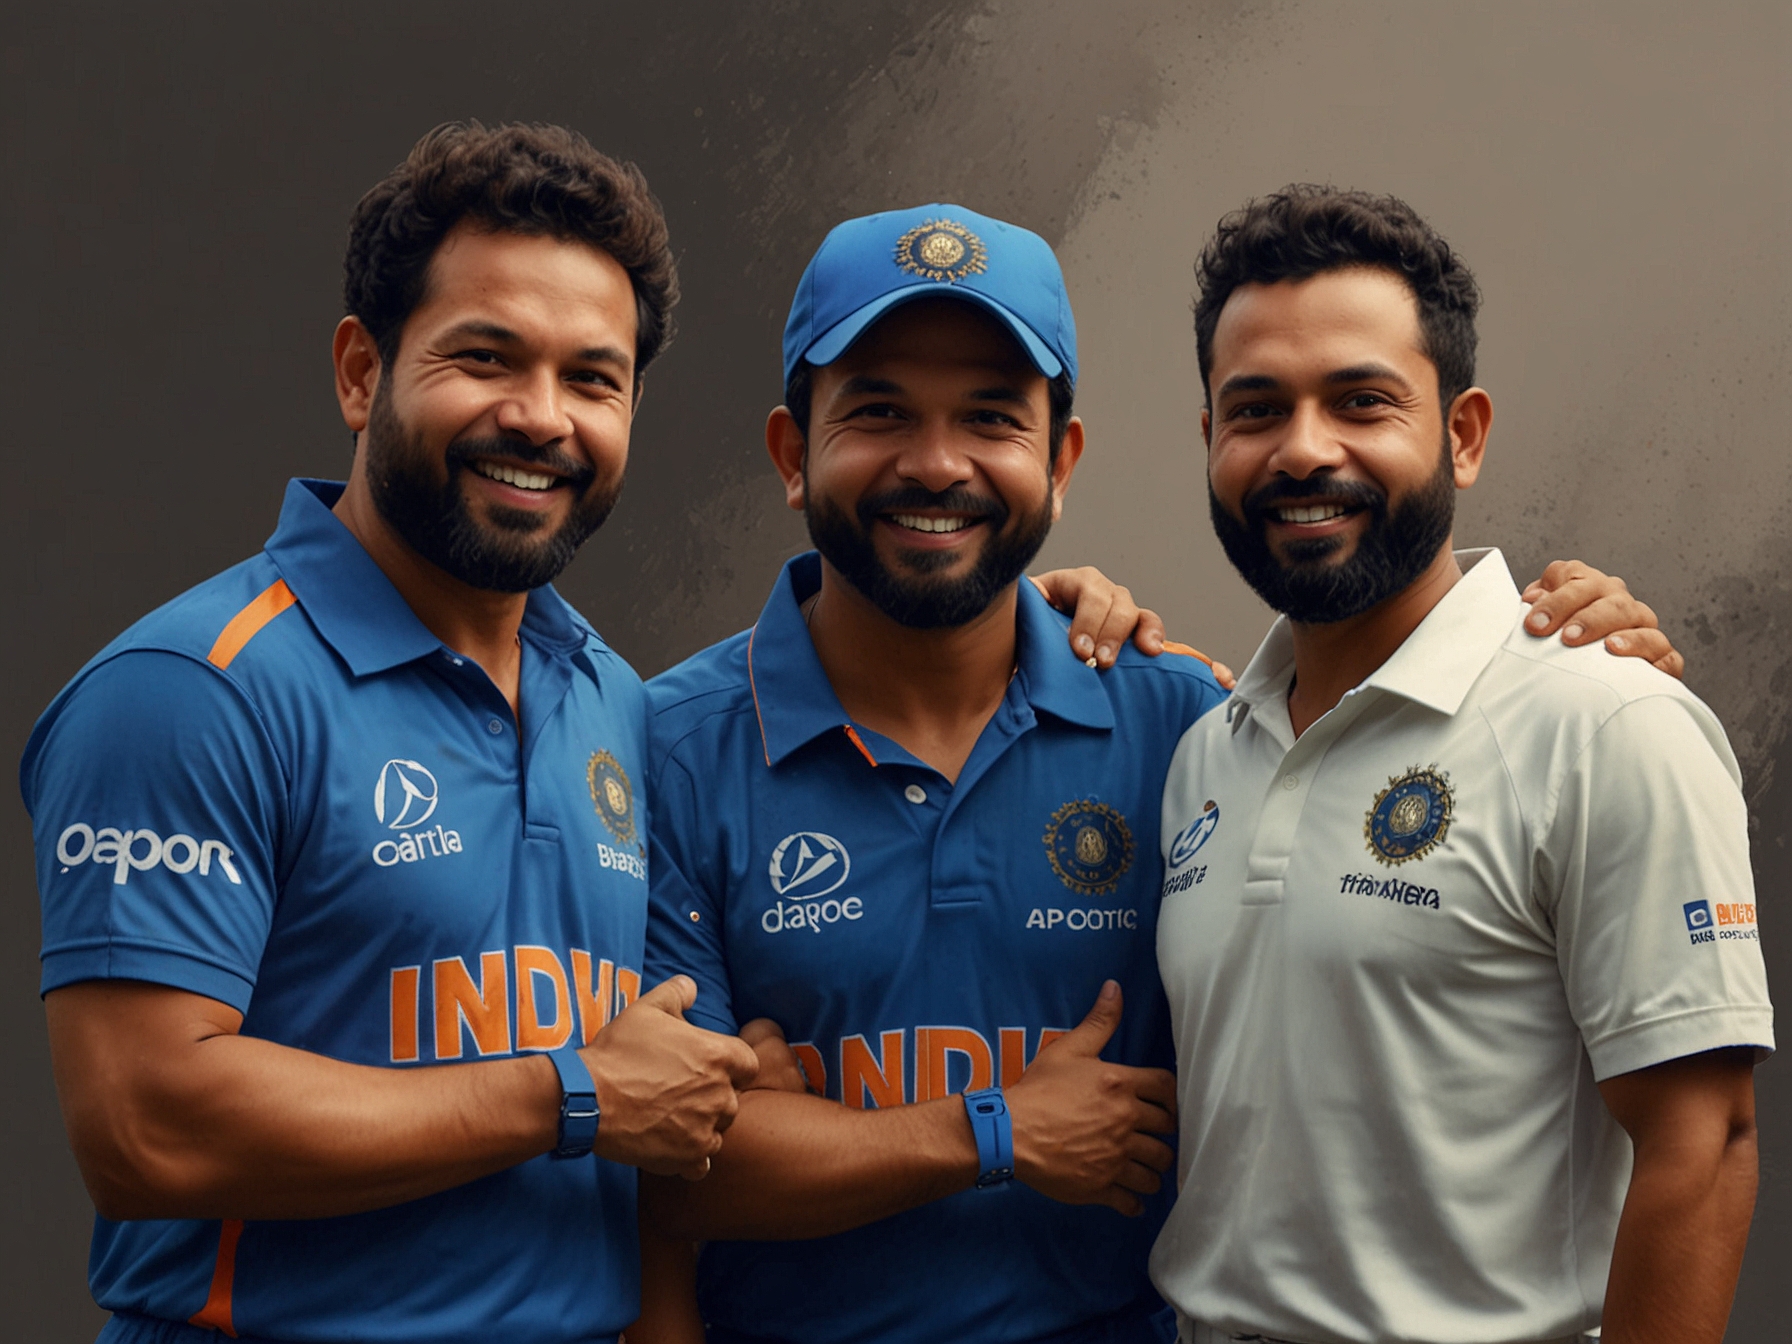 Sachin Tendulkar shares a heartfelt message to Virat Kohli and Rohit Sharma on social media, praising their illustrious careers and significant contributions to Indian cricket.